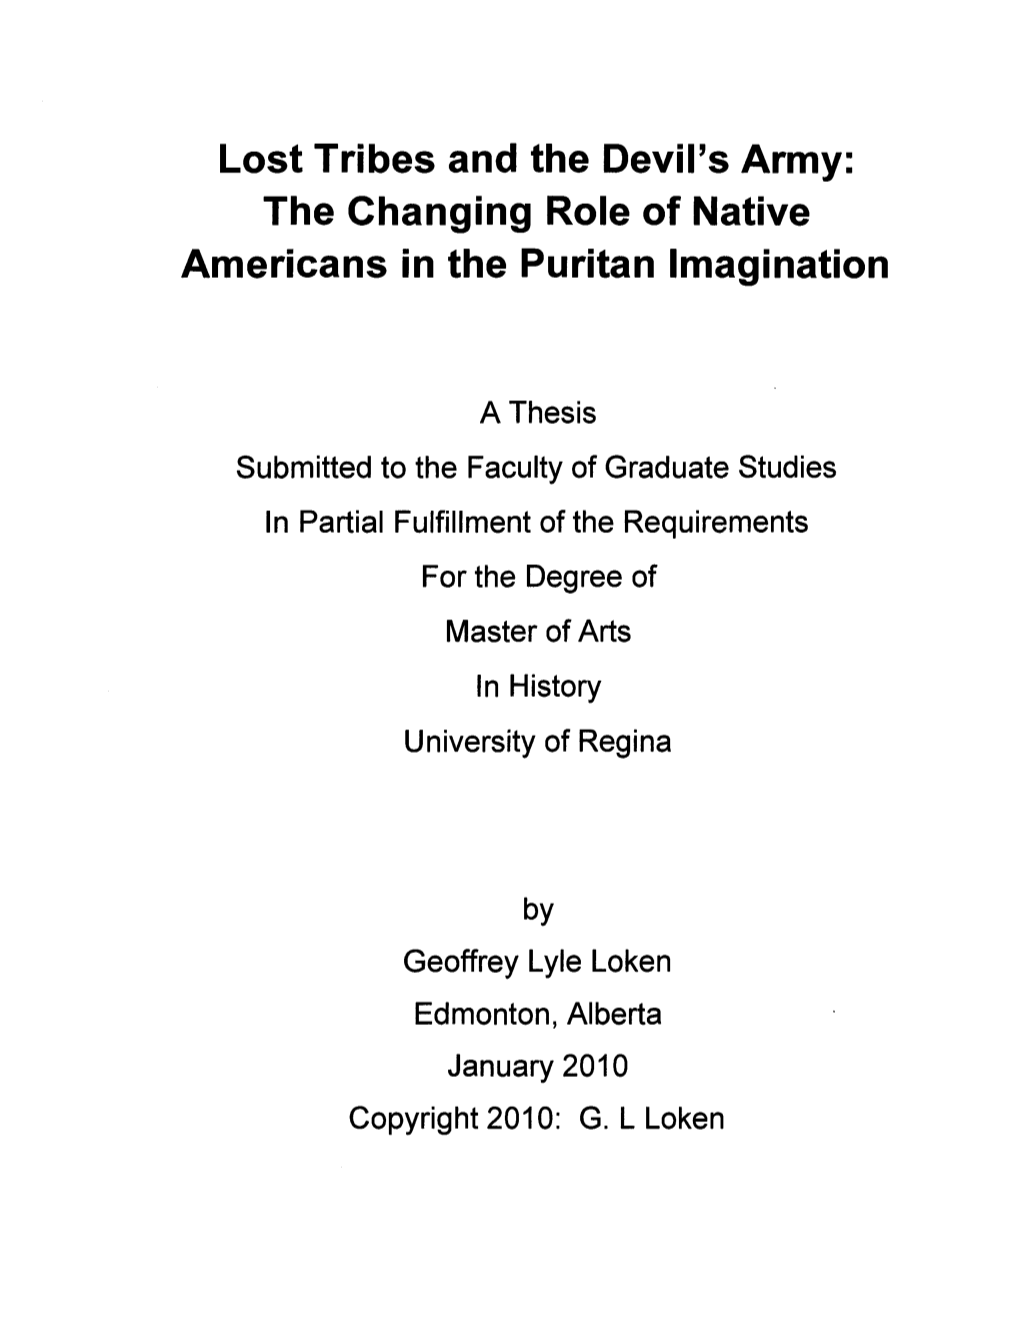 The Changing Role of Native Americans in the Puritan Imagination